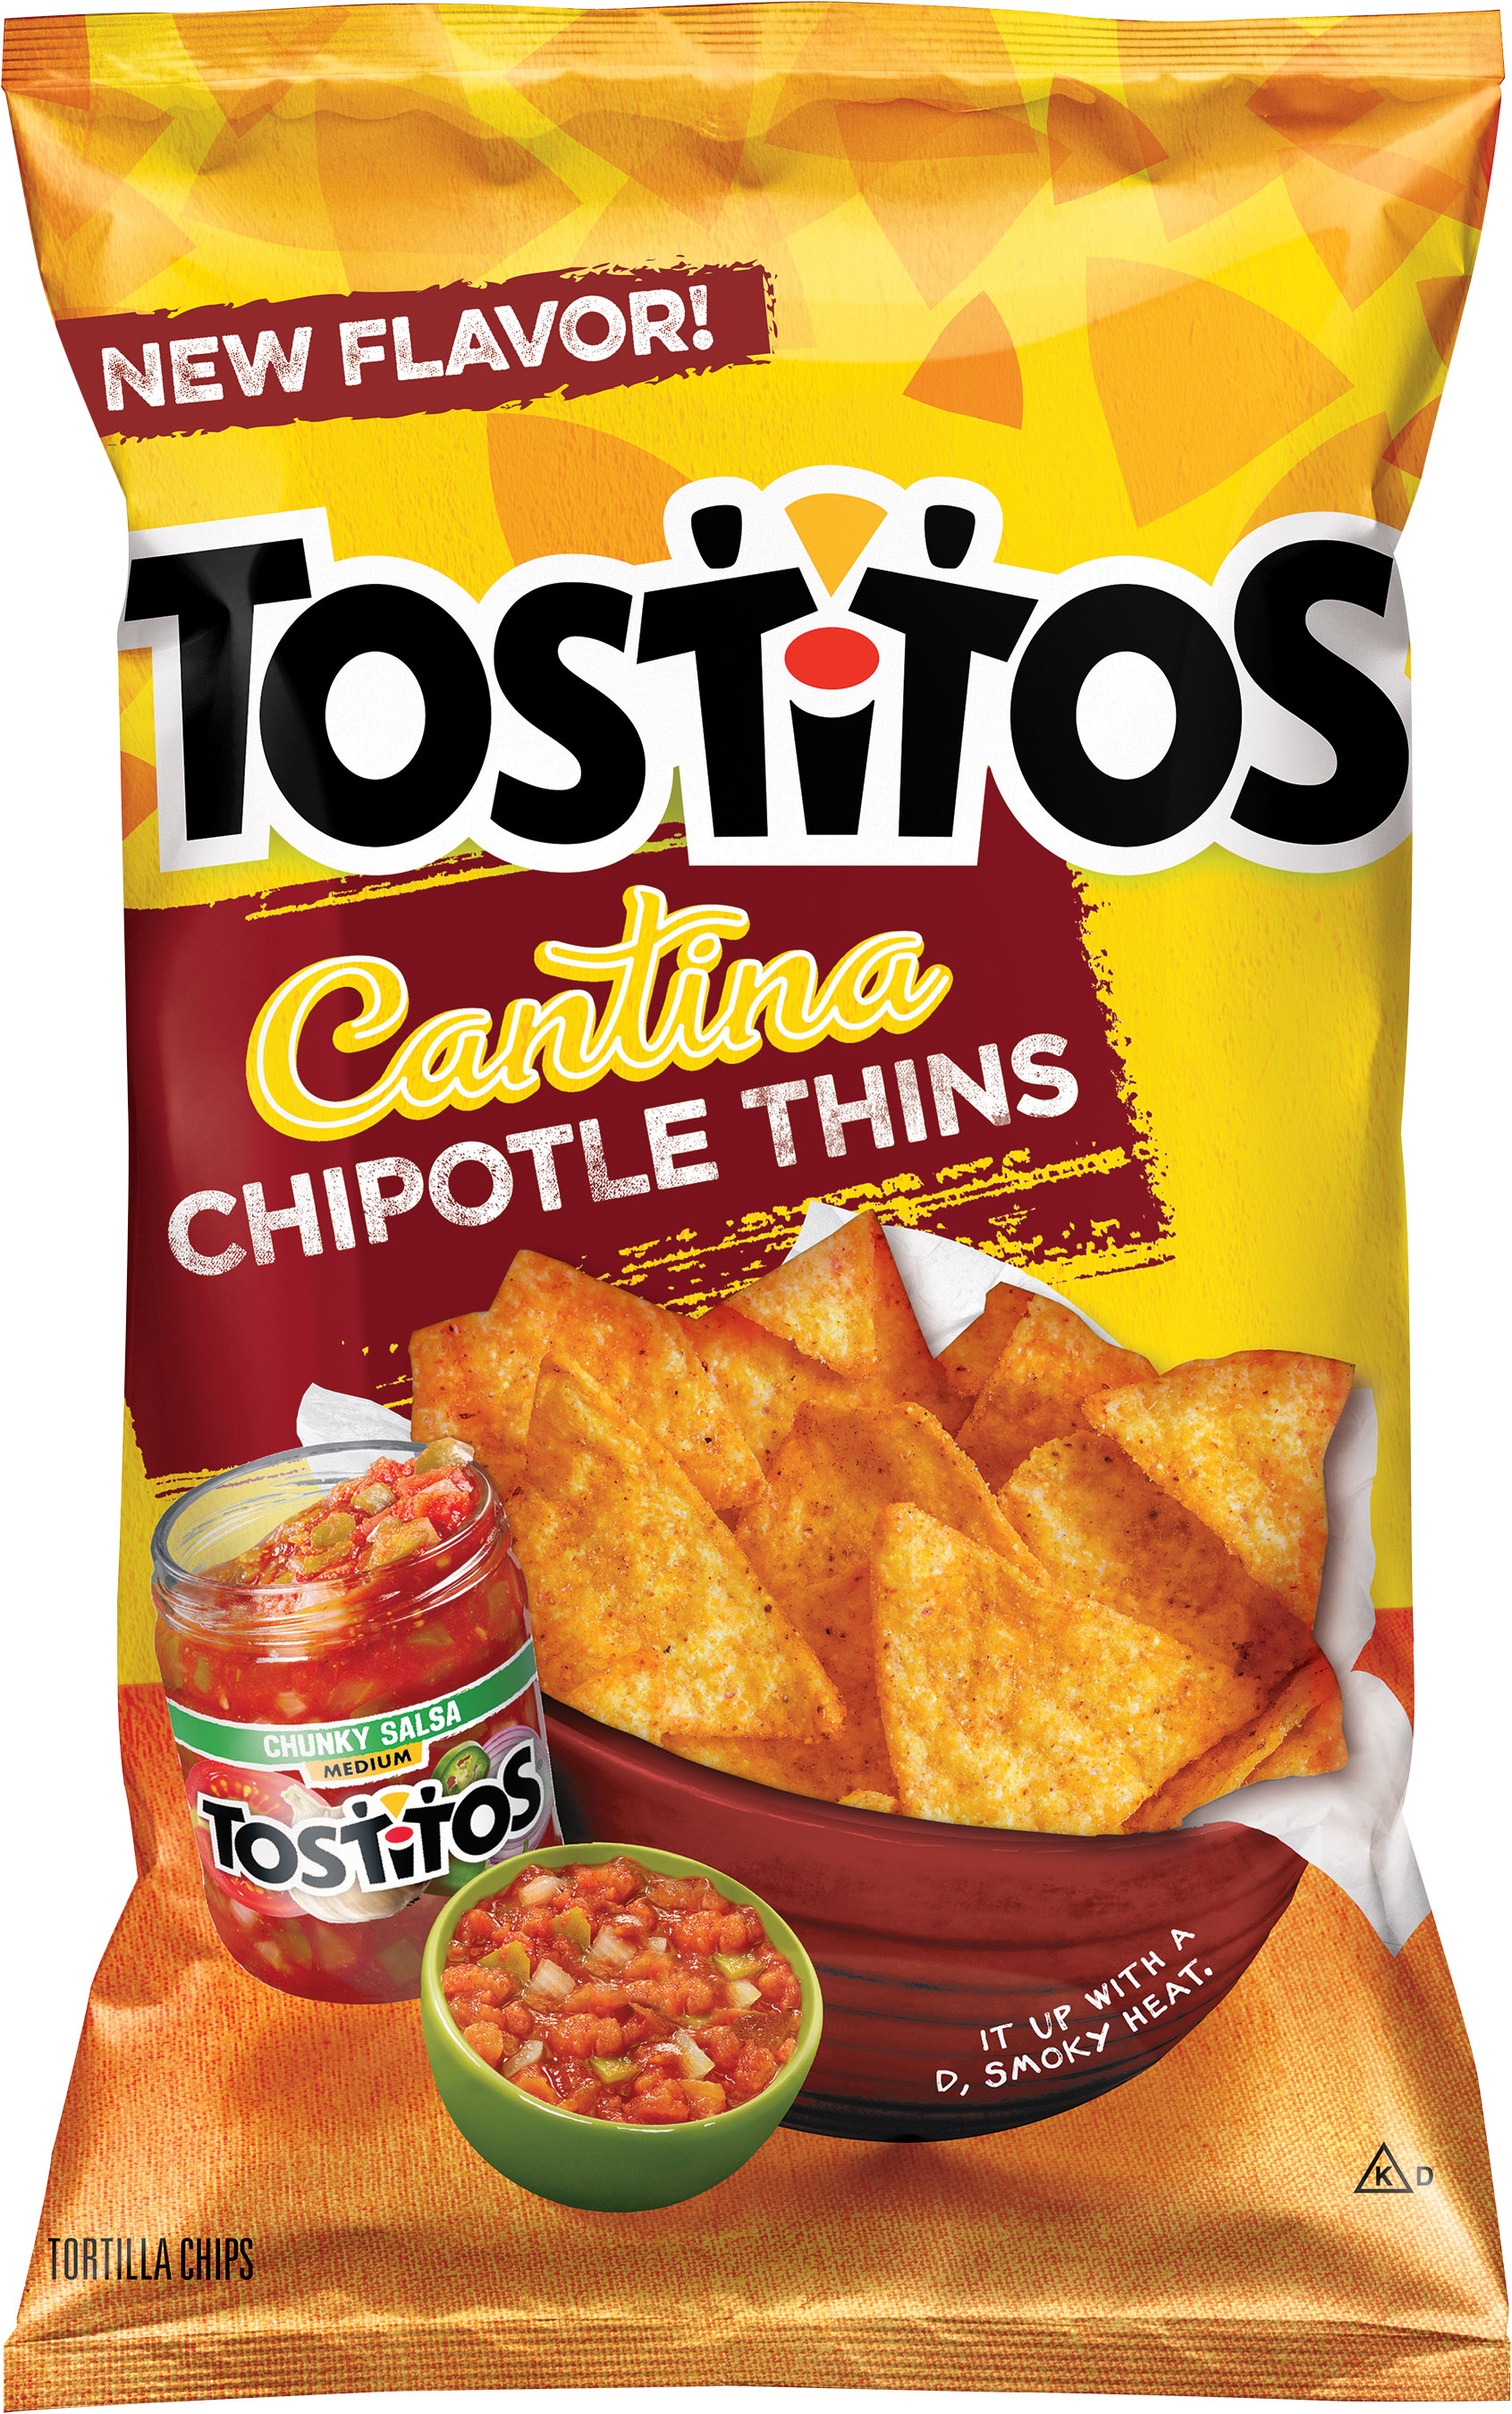 TOSTITOS Cantina Chipotle Thins bring authentic seasoning and flavor to the tortilla-chip aisle. Each thin, crispy corn-tortilla chip is lightly sprinkled with the perfect blend of flavors and seasonings that let you enjoy a mild, smoky heat and authentic chipotle spice.